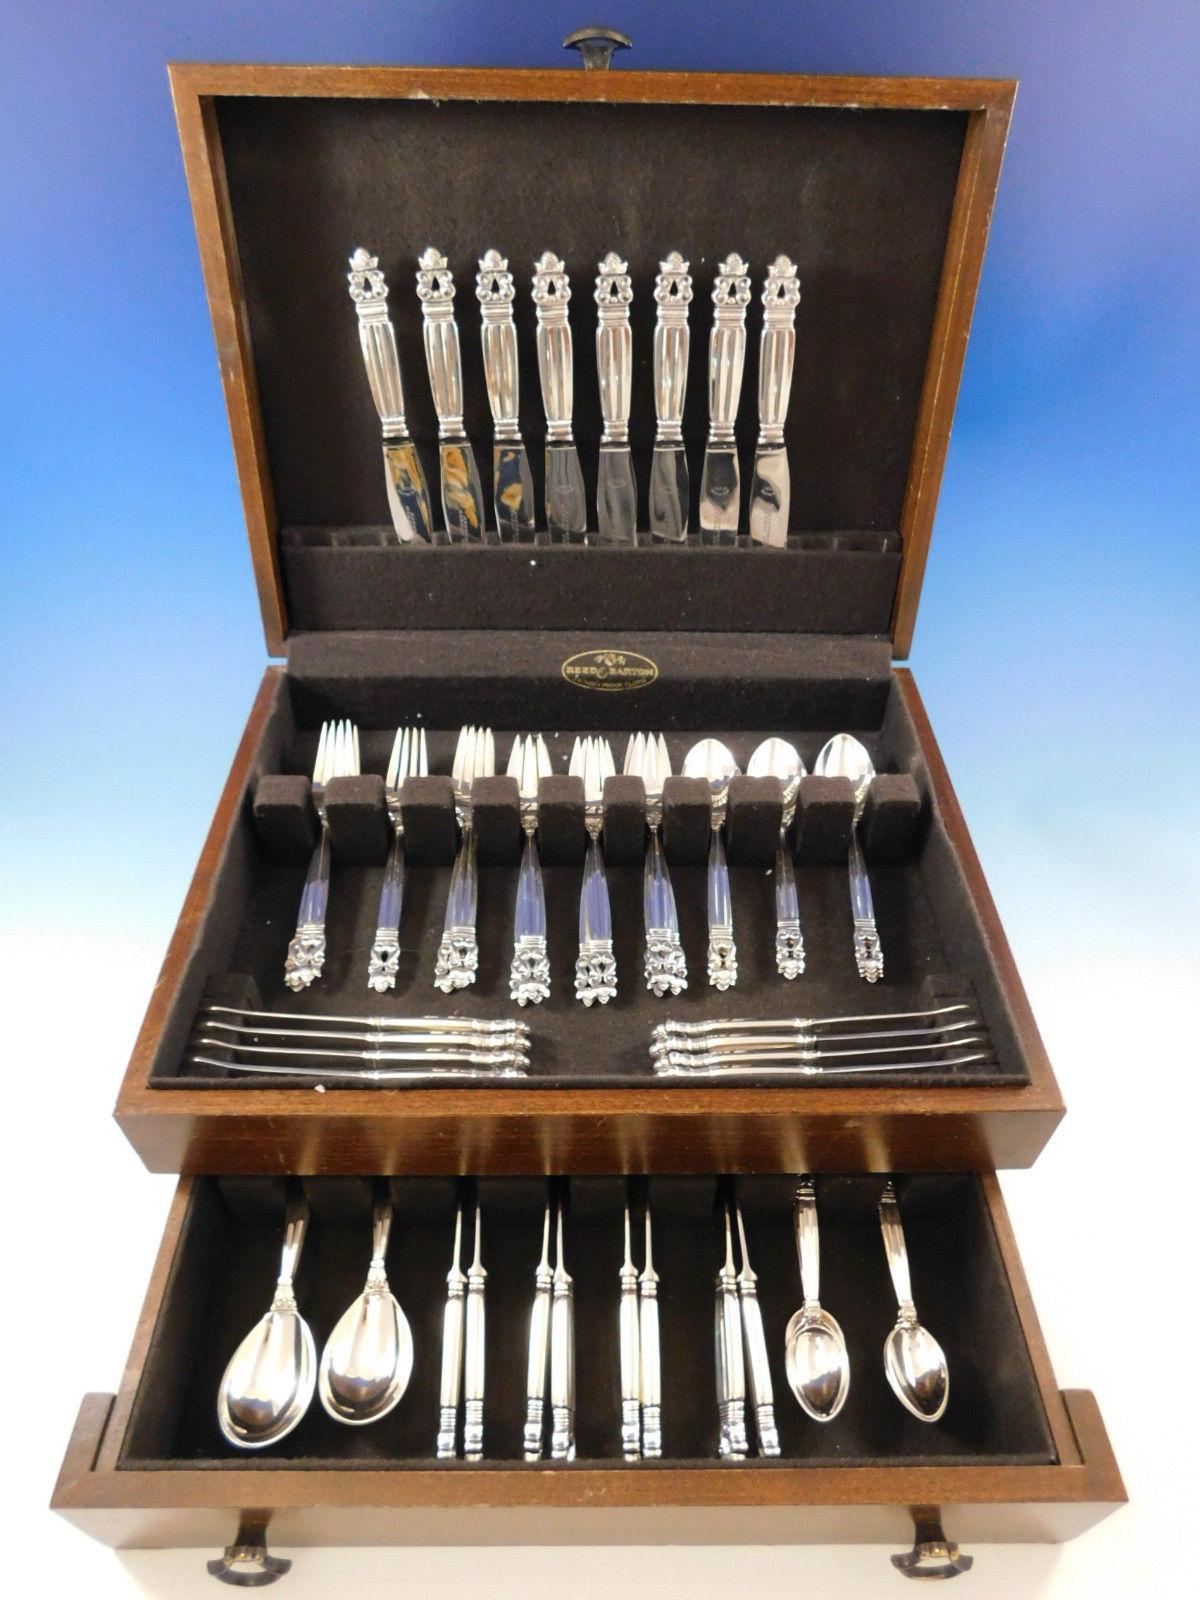 Superb acorn by Georg Jensen Danish sterling silver flatware set, 64 pieces. This set includes:

8 luncheon knives, 8